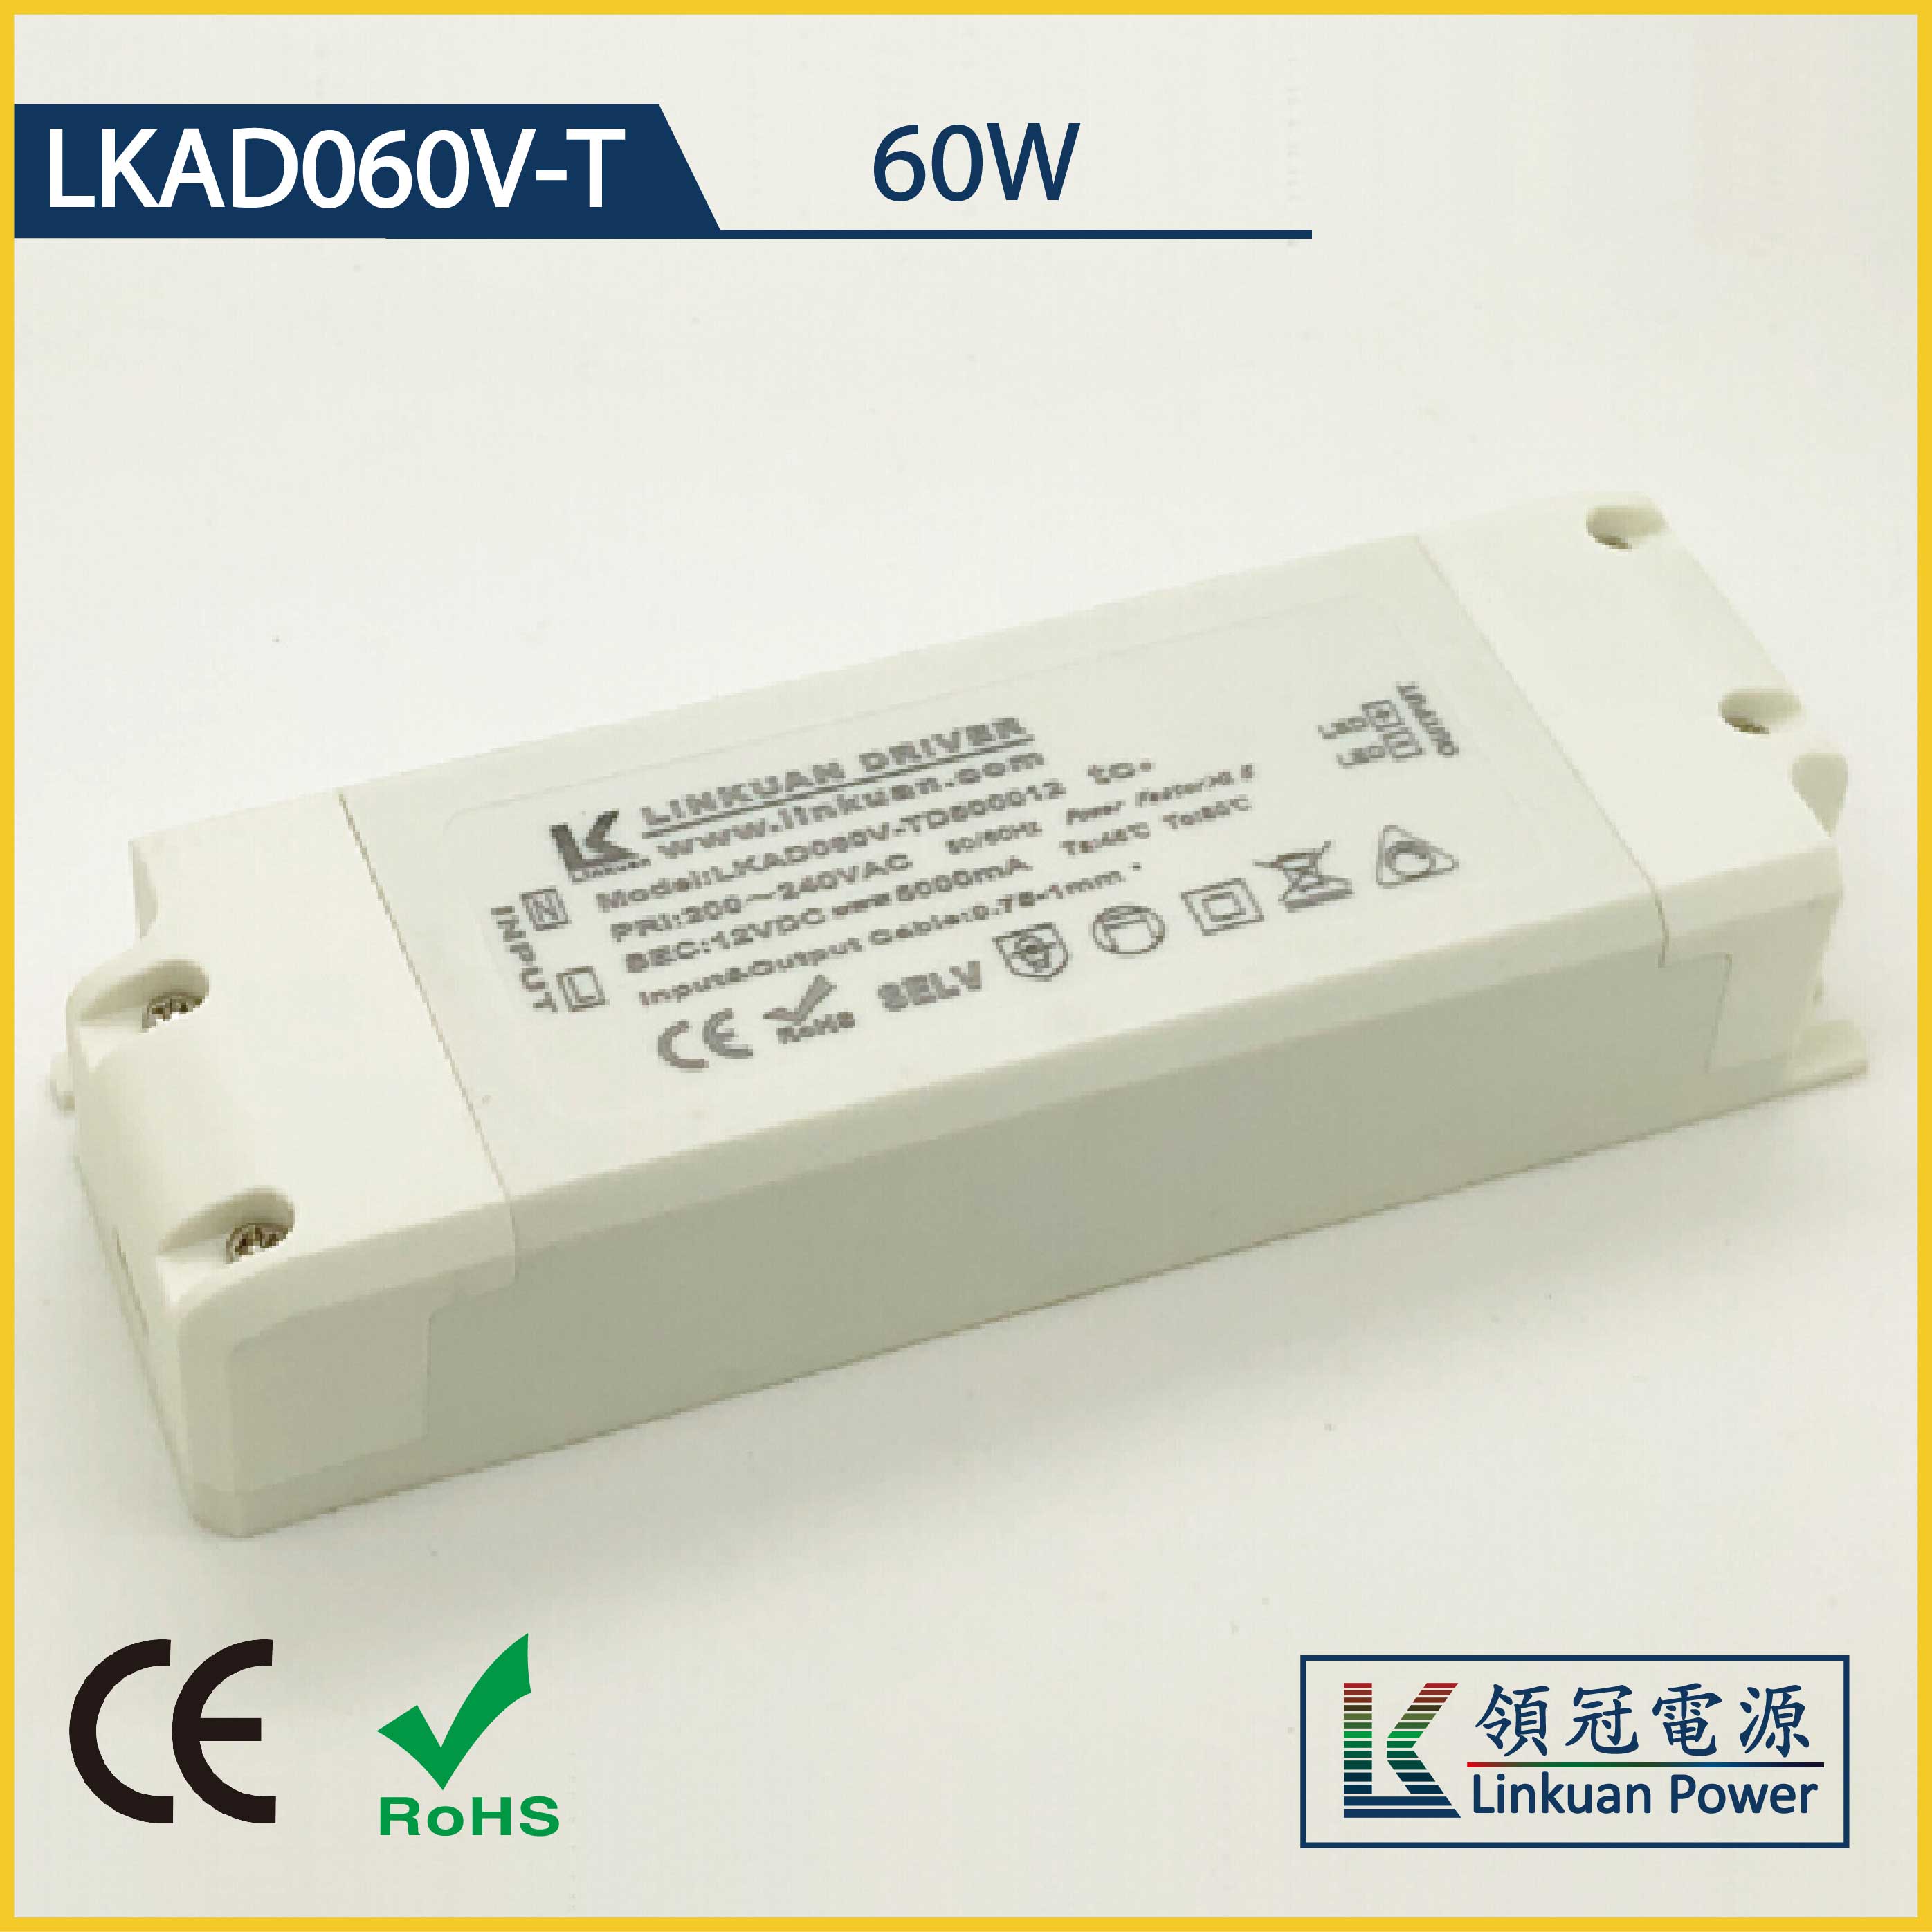 LKAD060V-TD 60W constant voltage 12/24V 5A/2.5A triac dimmable led driver